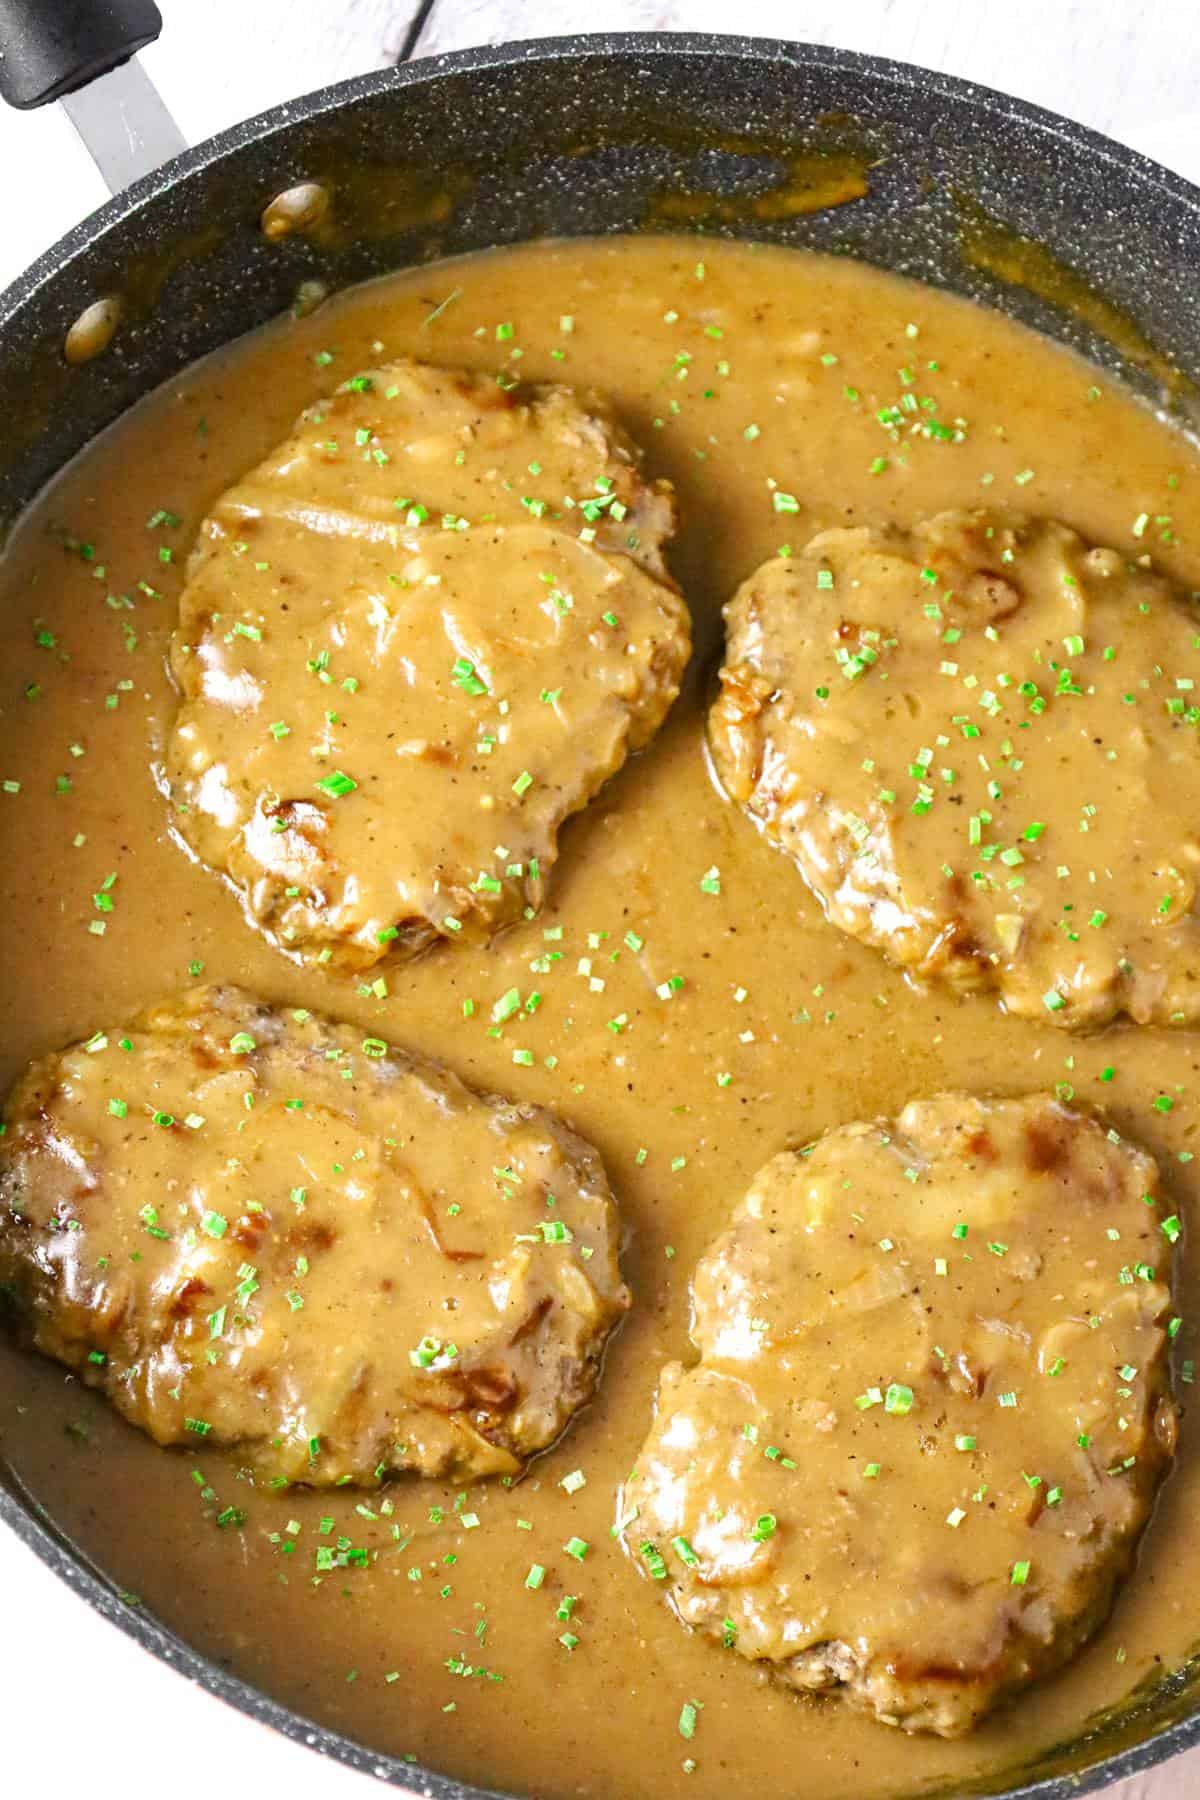 Hamburger Steak is an easy stove top dinner recipe of ground beef patties and onions cooked in brown gravy.